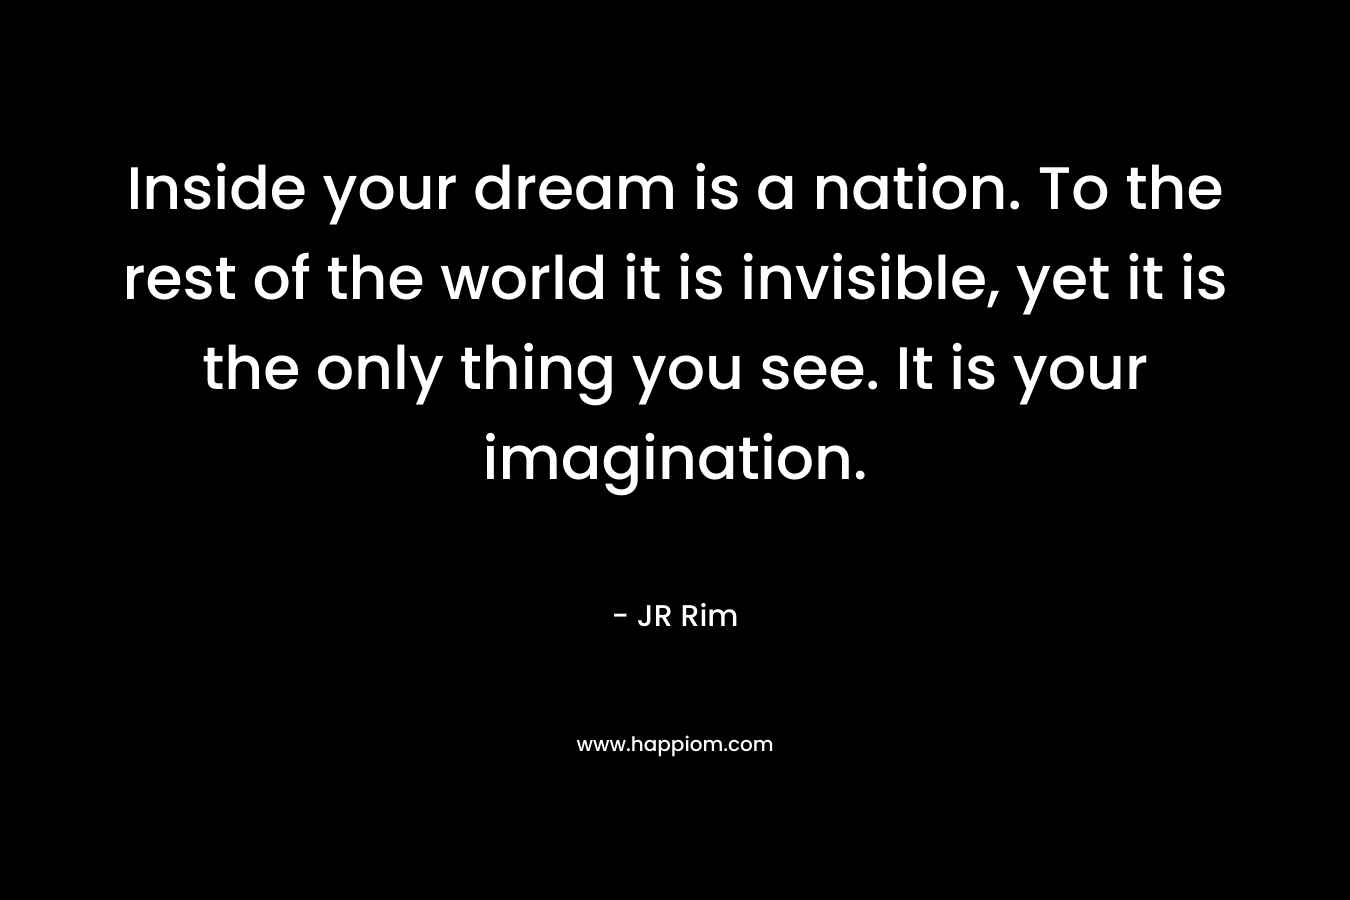 Inside your dream is a nation. To the rest of the world it is invisible, yet it is the only thing you see. It is your imagination.